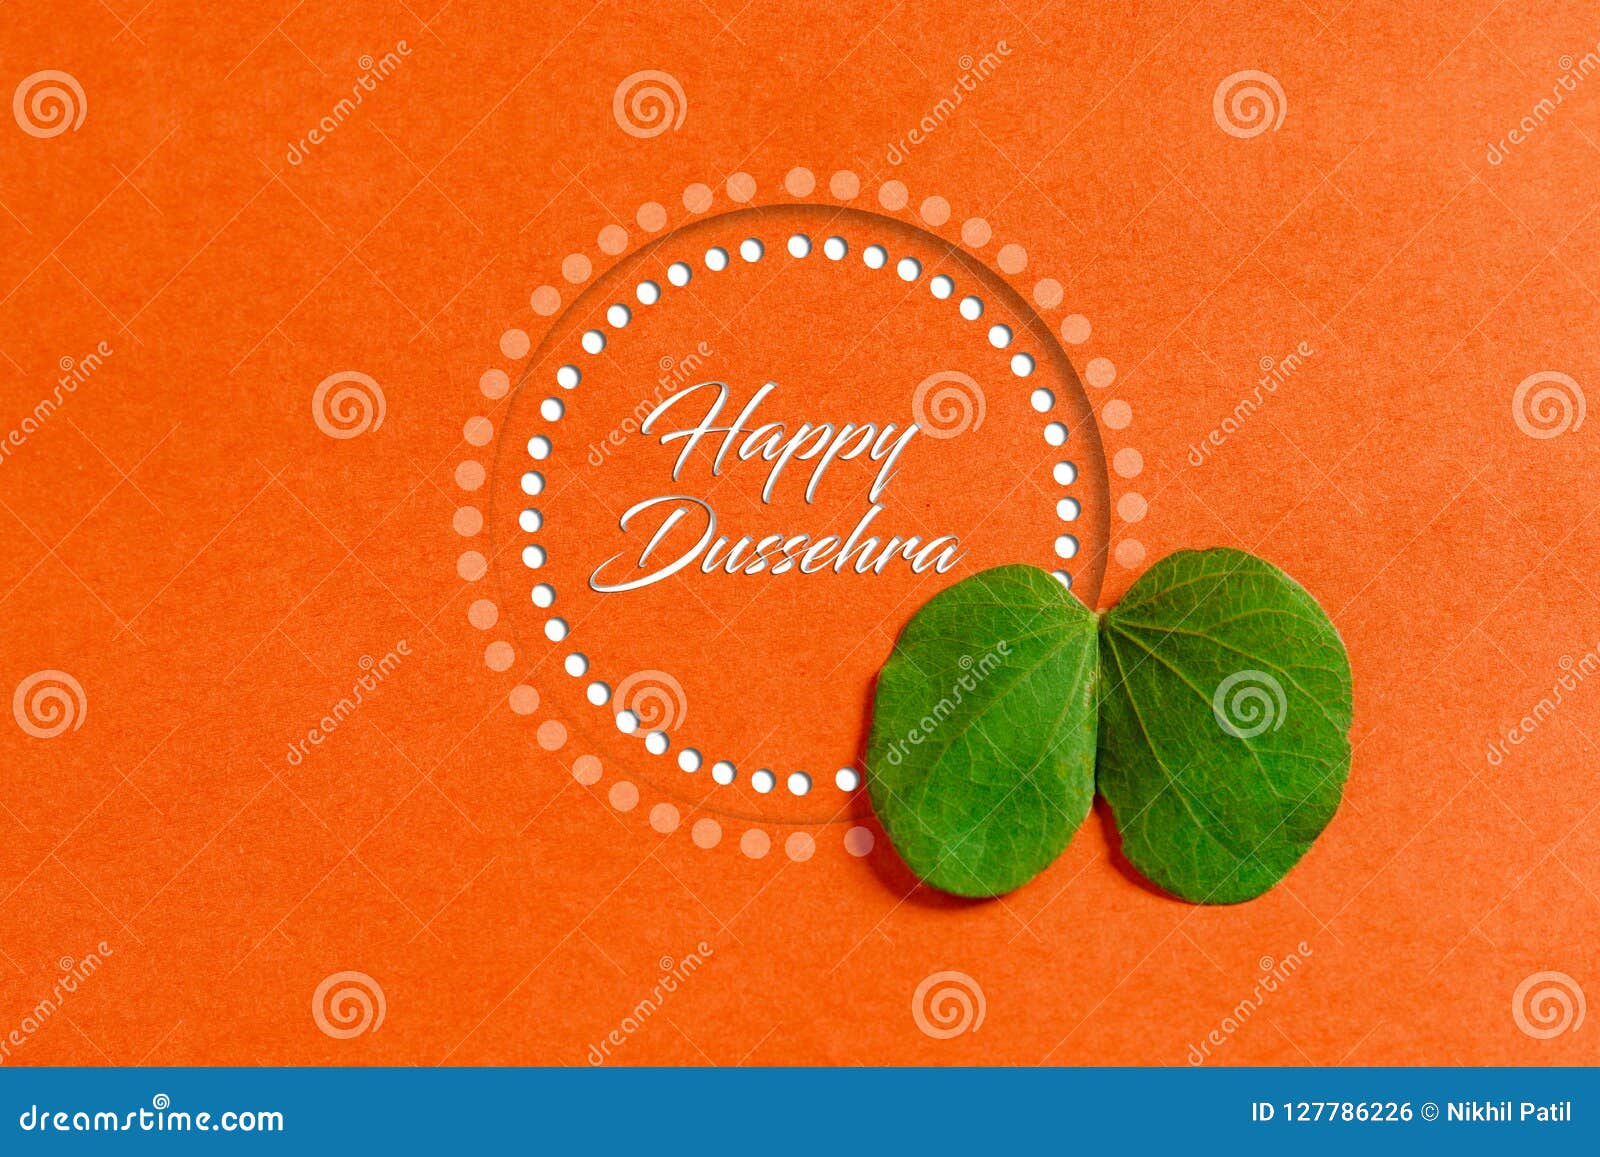 Happy Dussehra Greeting Card , Green Leaf Stock Photo - Image of ...